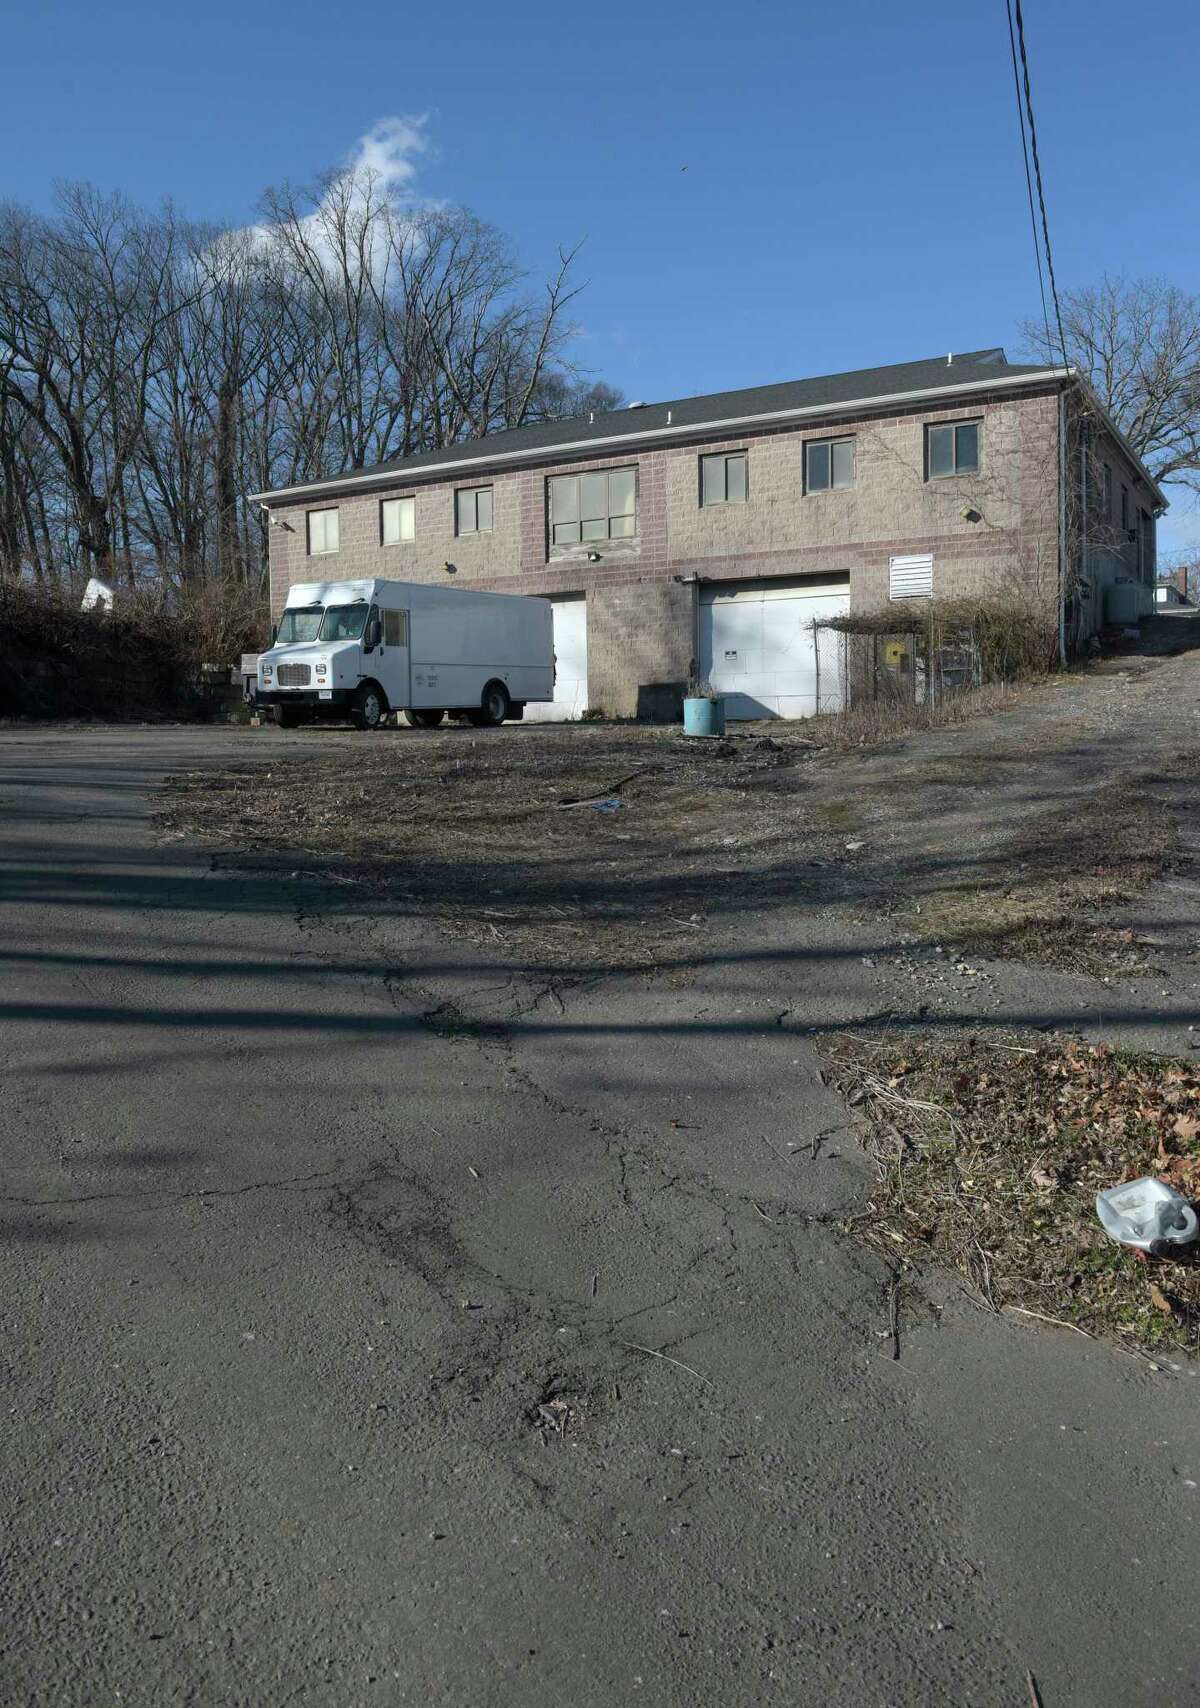 Property at 10 Tito Court, Norwalk, Conn., on Friday, February, 3, 2023. The property was acquired by the city via eminent domain in 2018 and is now being repurposed for the use of the Recreation and Parks Department. 